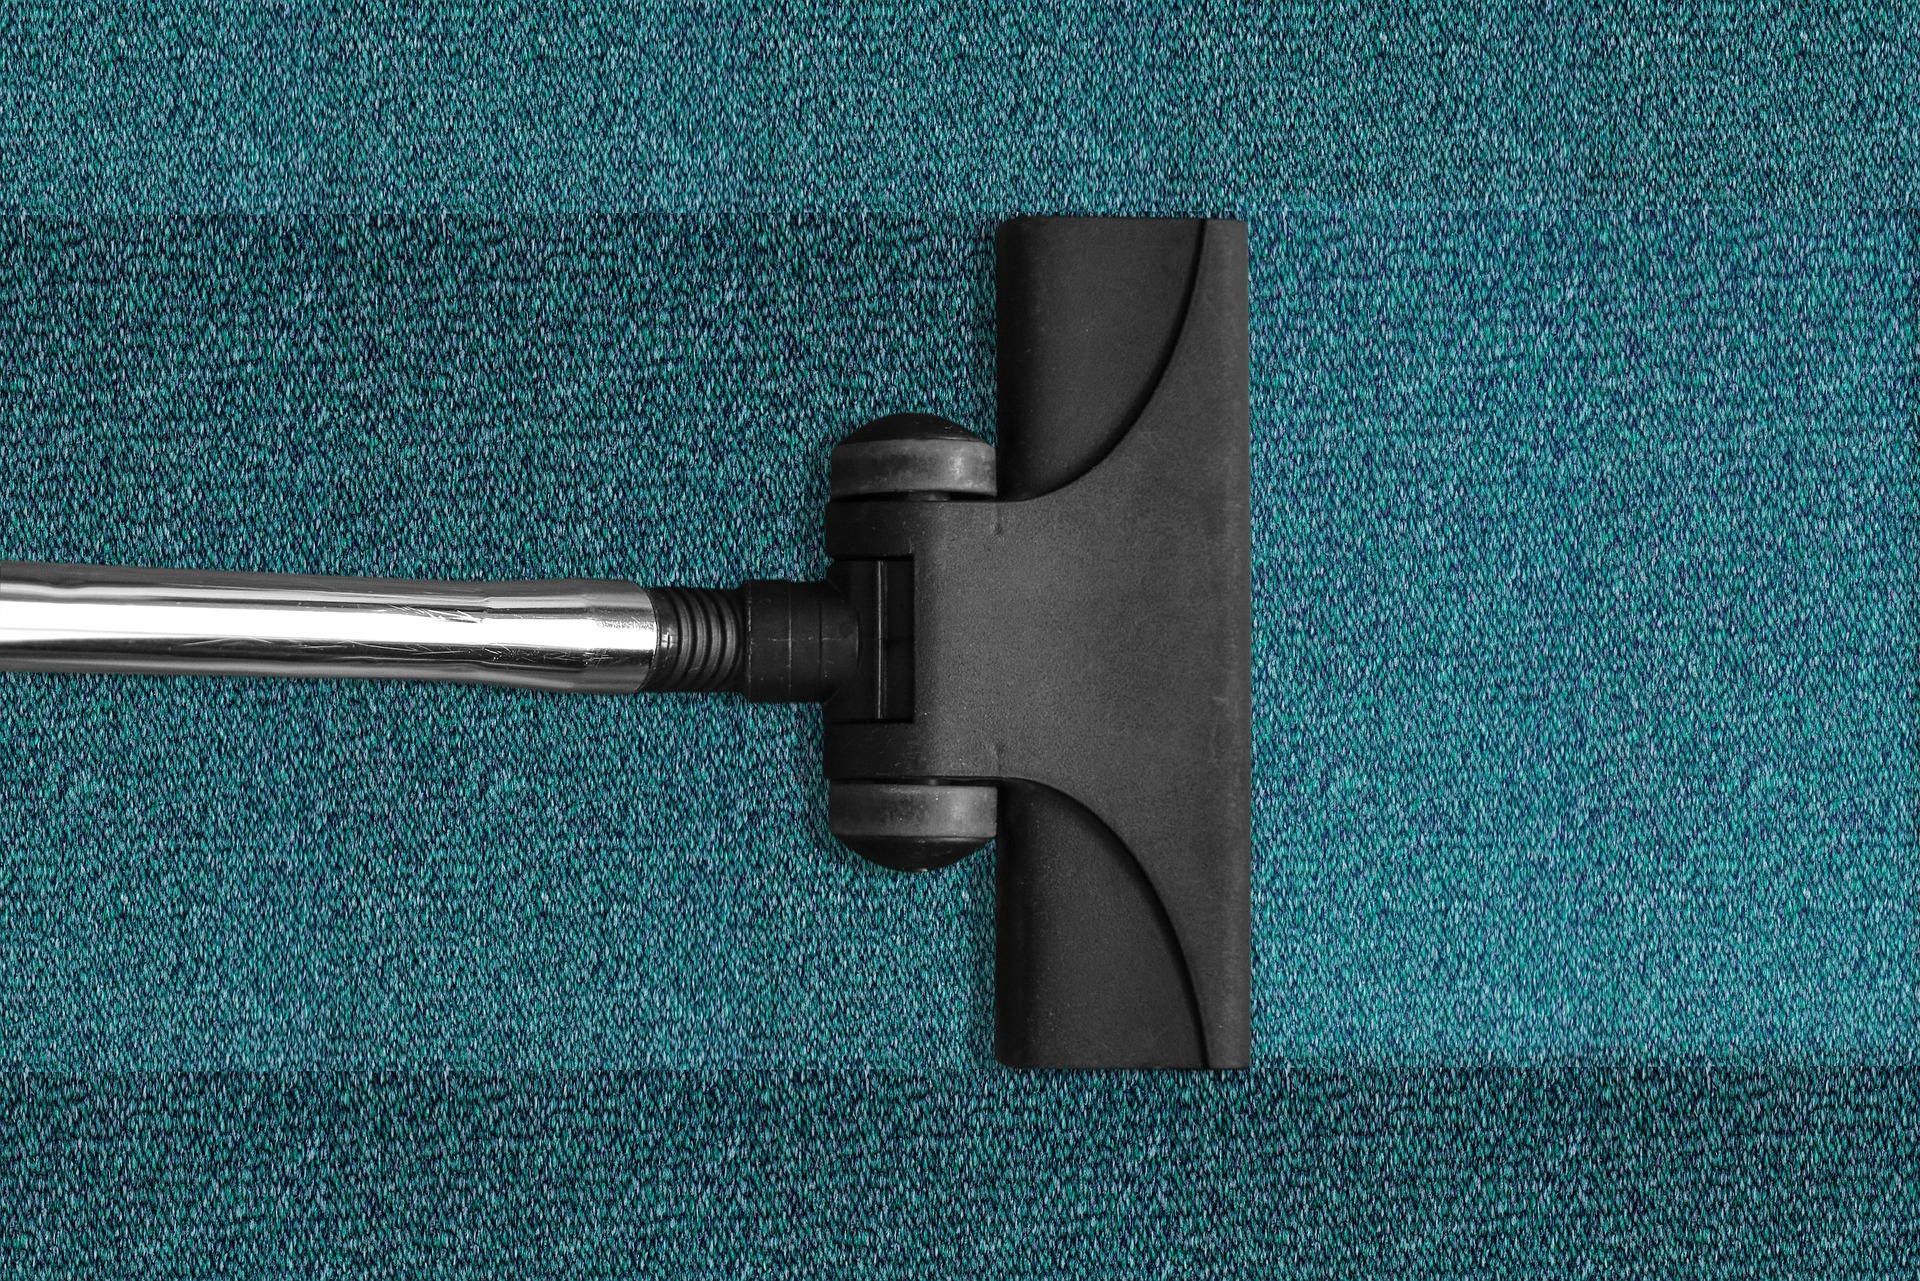 Cleaning water damaged carpets in central New Jersey.